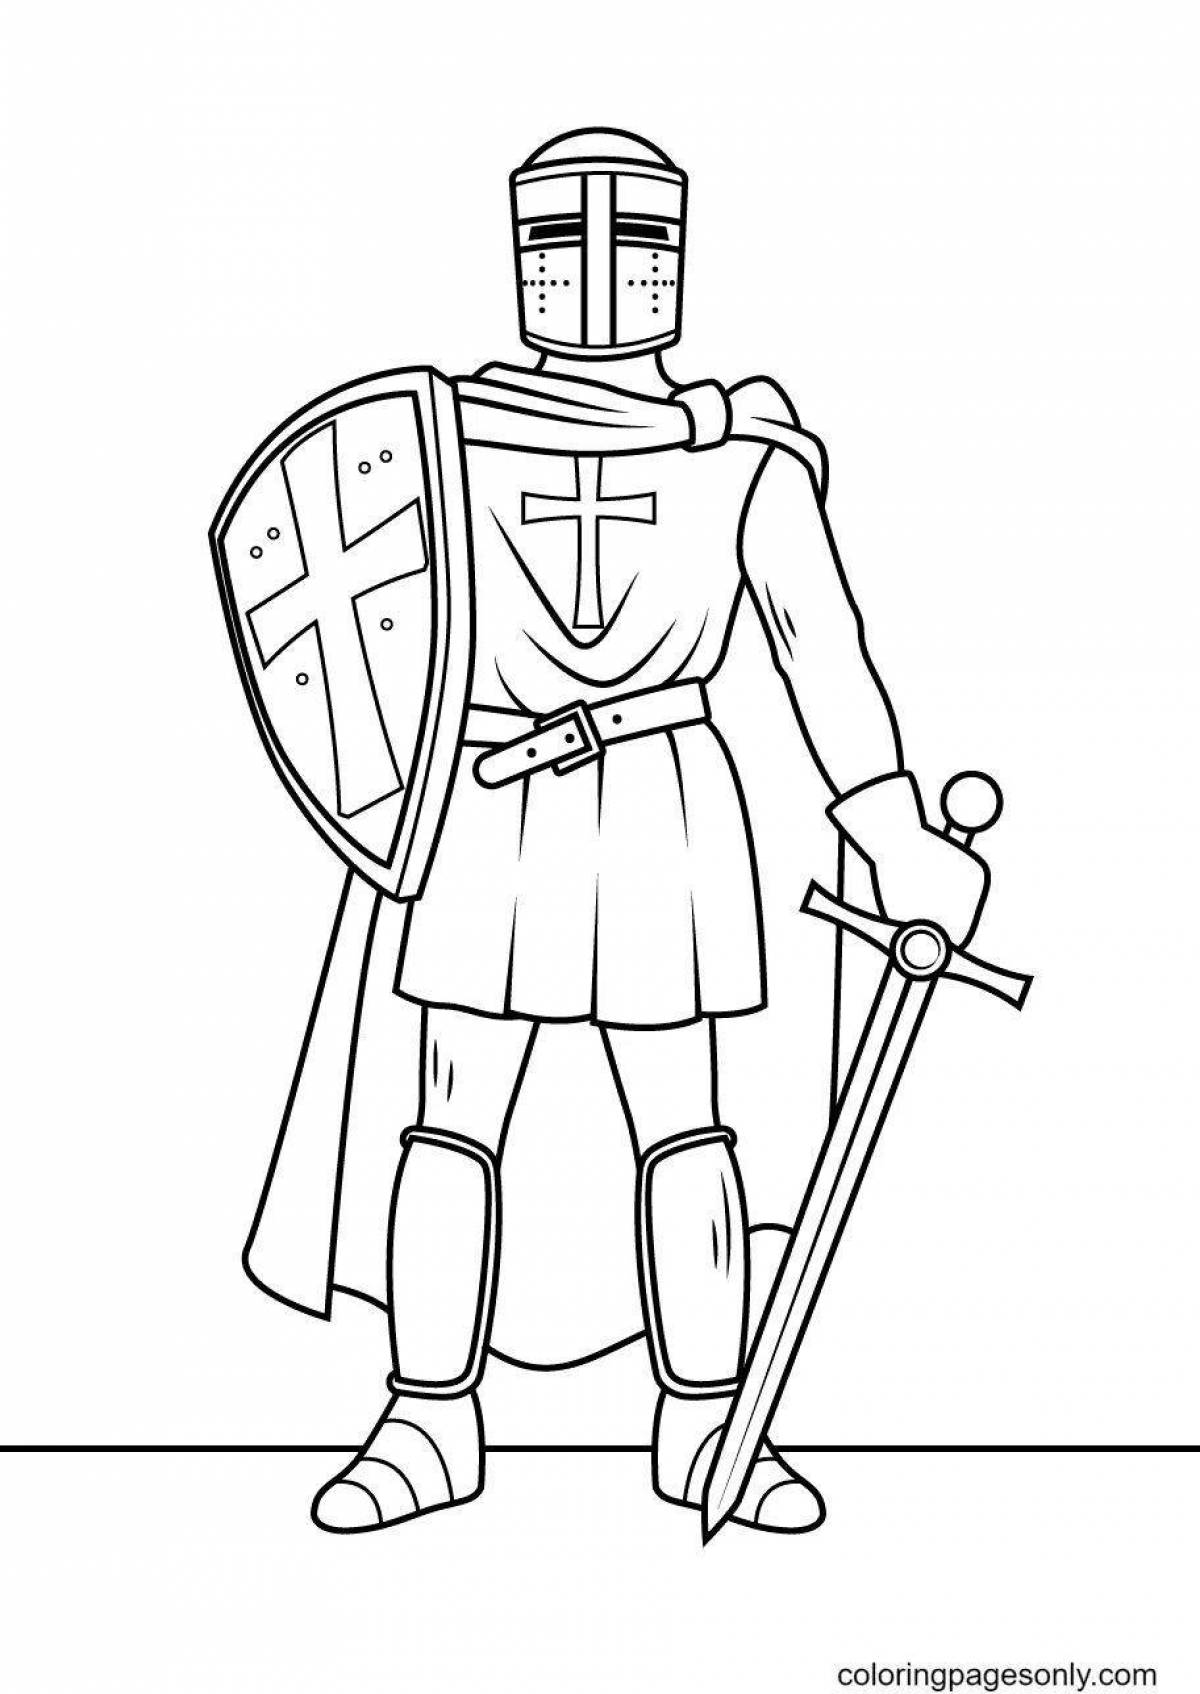 Dashing knight coloring for kids